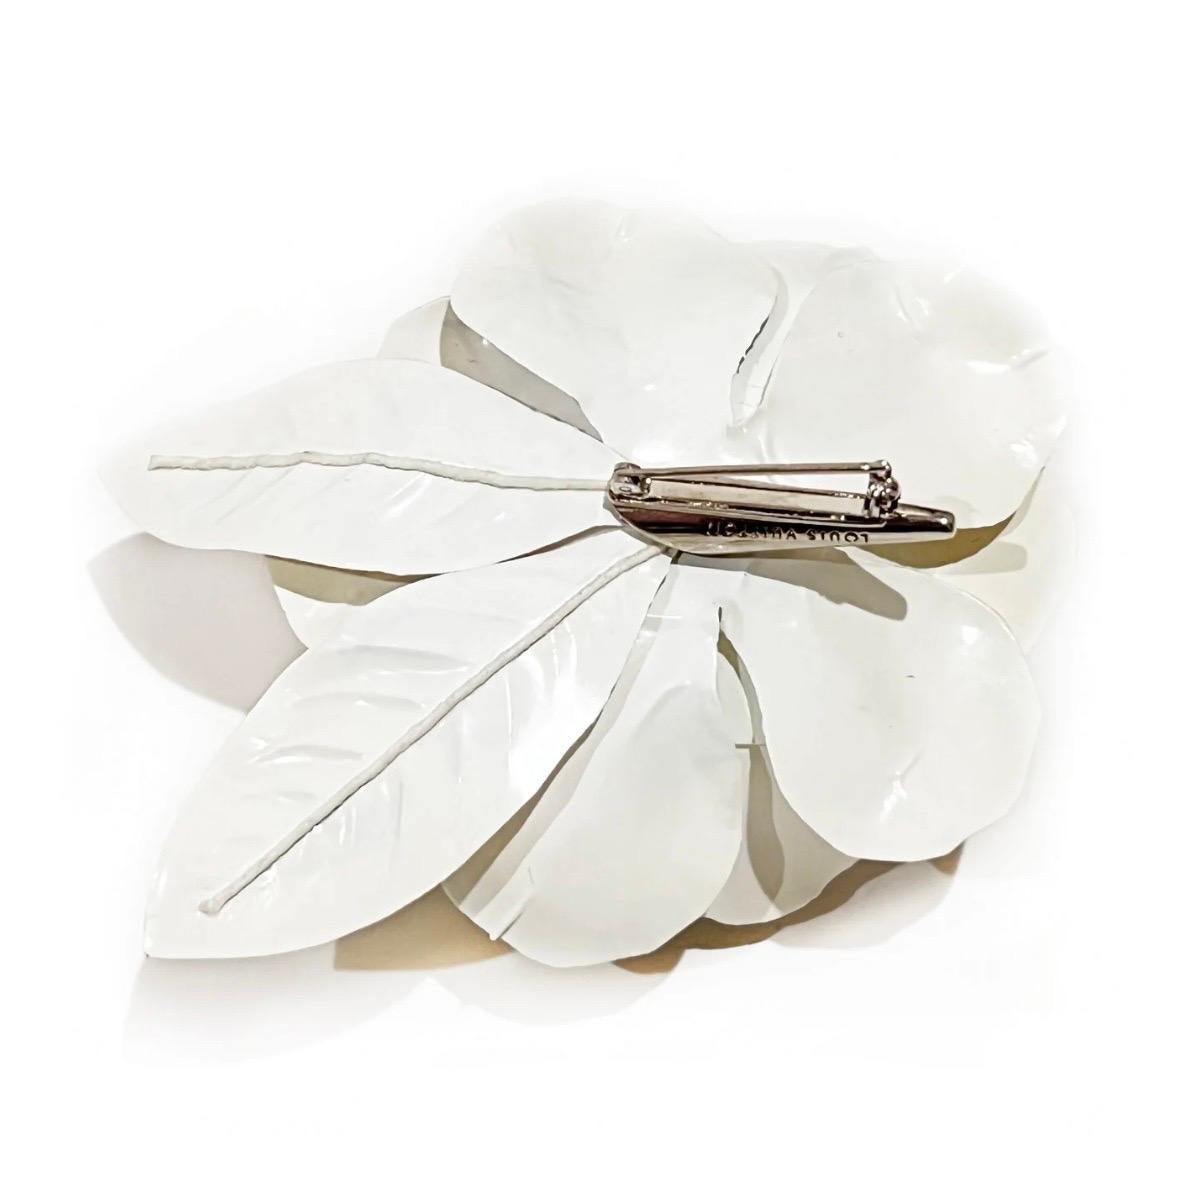 Multicolor monogram flower brooch by Takashi Murakami for Louis Vuitton
2003
Ivory laminated plastic 
Multicolored LV monogram print throughout 
Silver-metal pin closure on the back 
Condition: Great, some small bends in a few flower petals. 